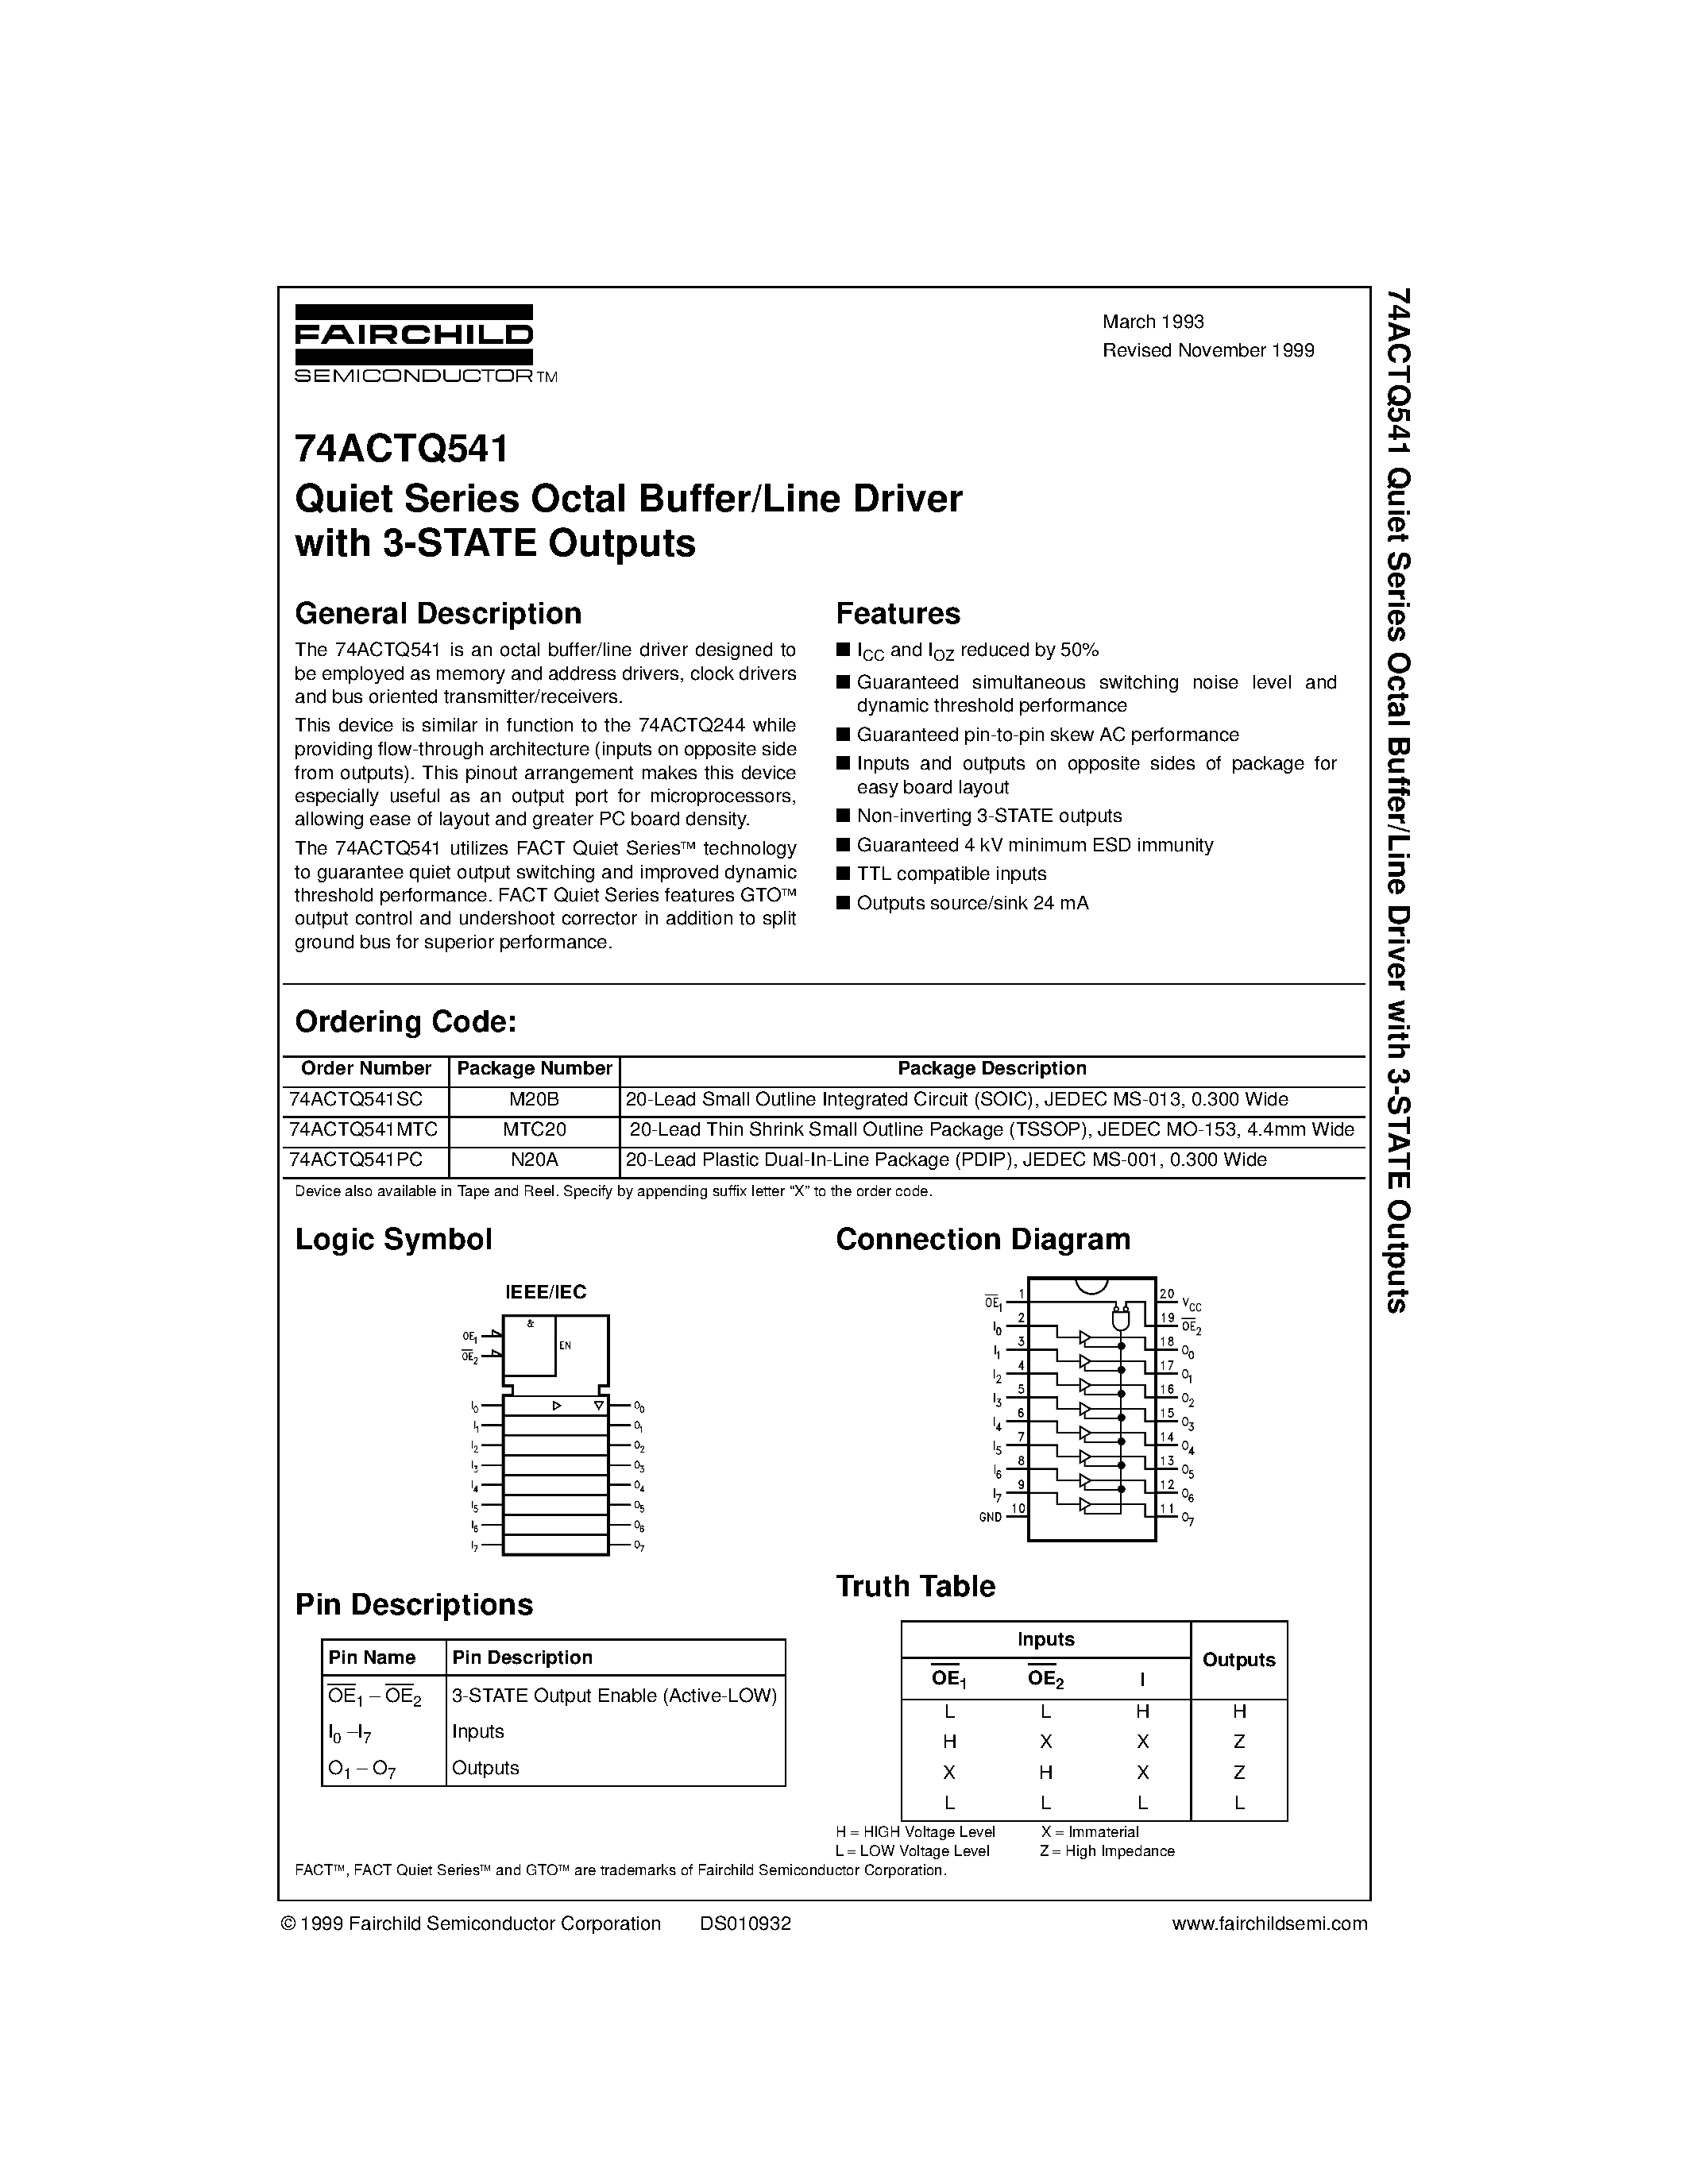 Datasheet 74ACTQ541MTC - Quiet Series Octal Buffer/Line Driver with 3-STATE Outputs page 1